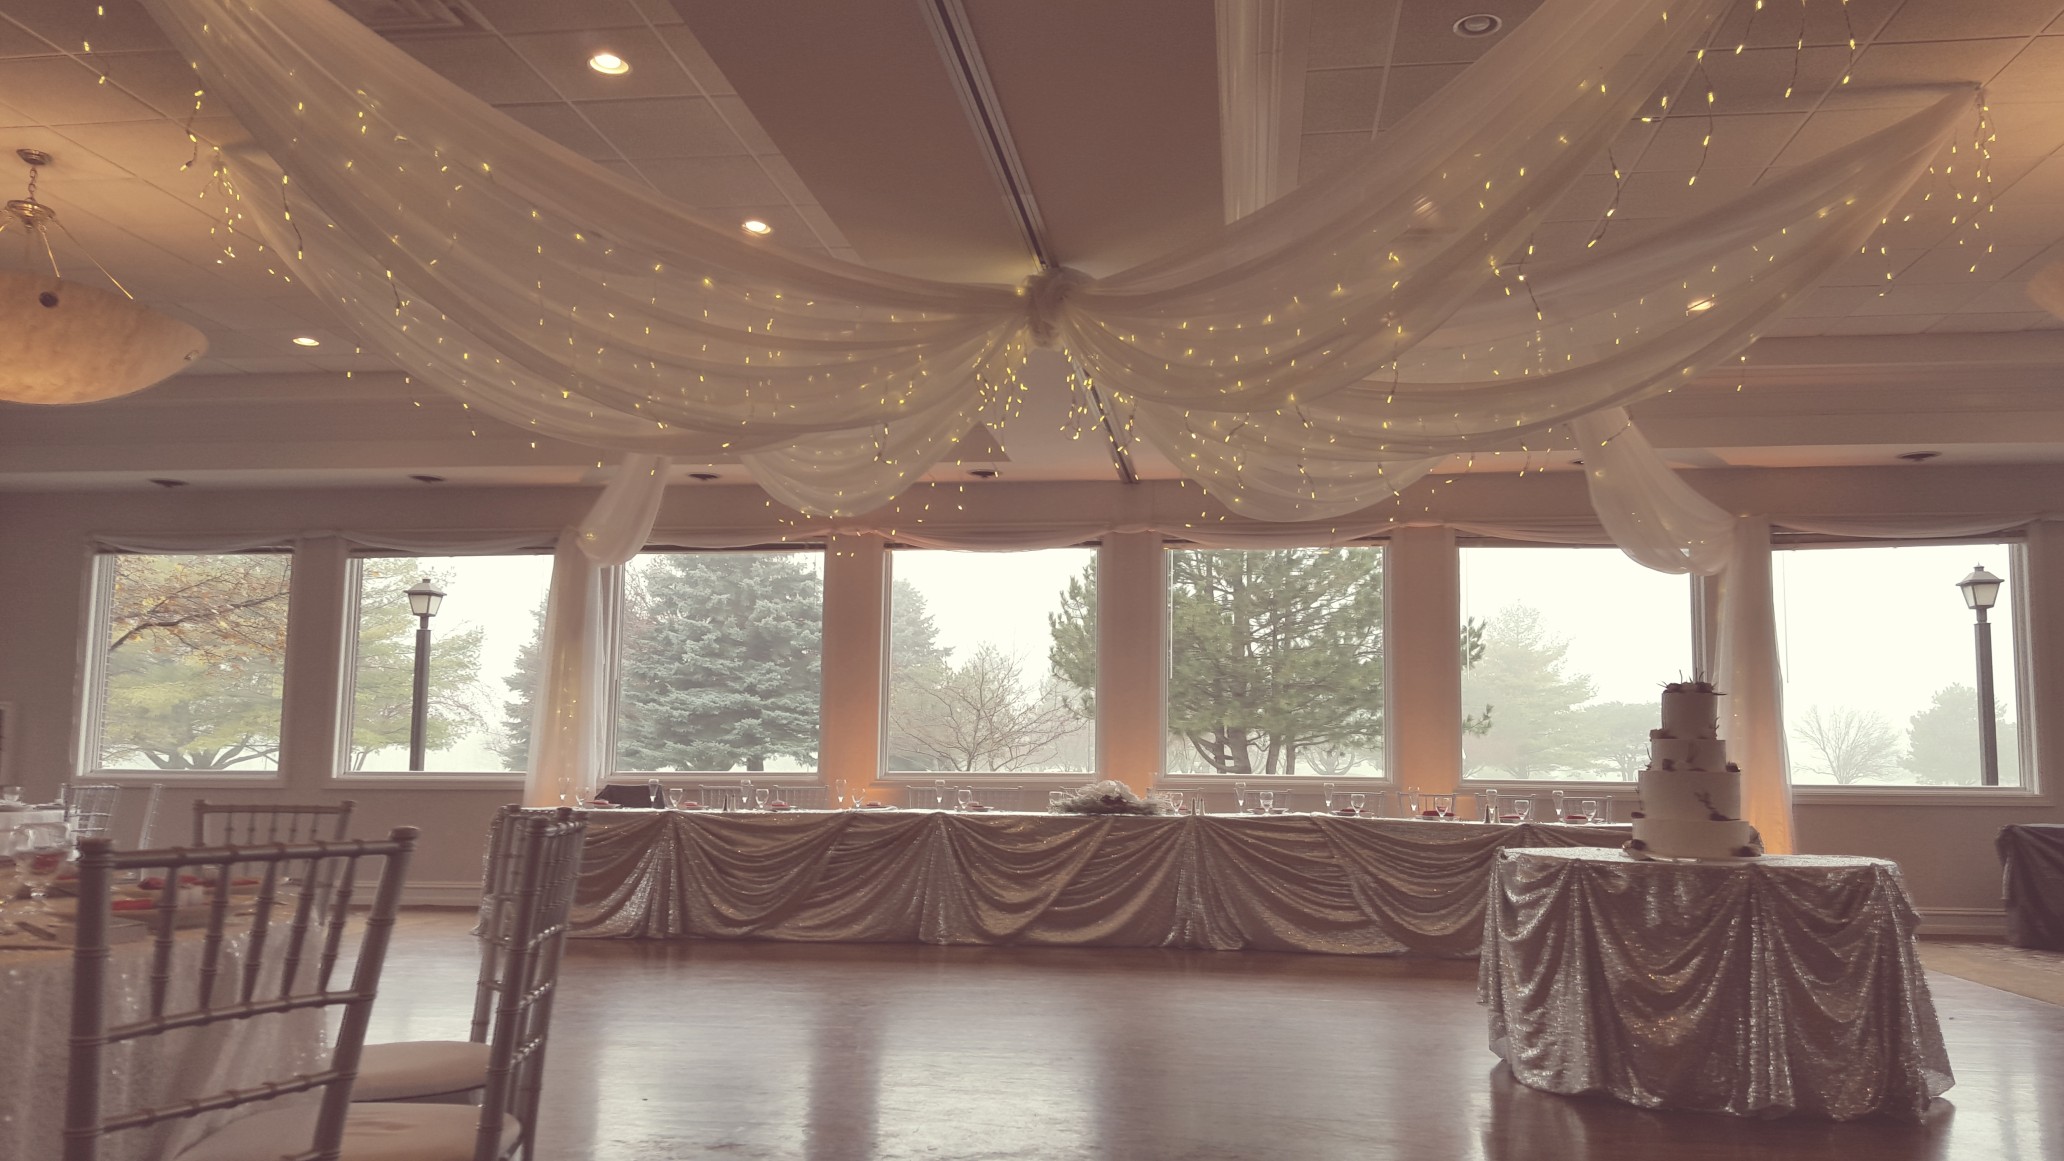 Ceiling Drapes With Twinkle Lights Sycamore Hills Linens